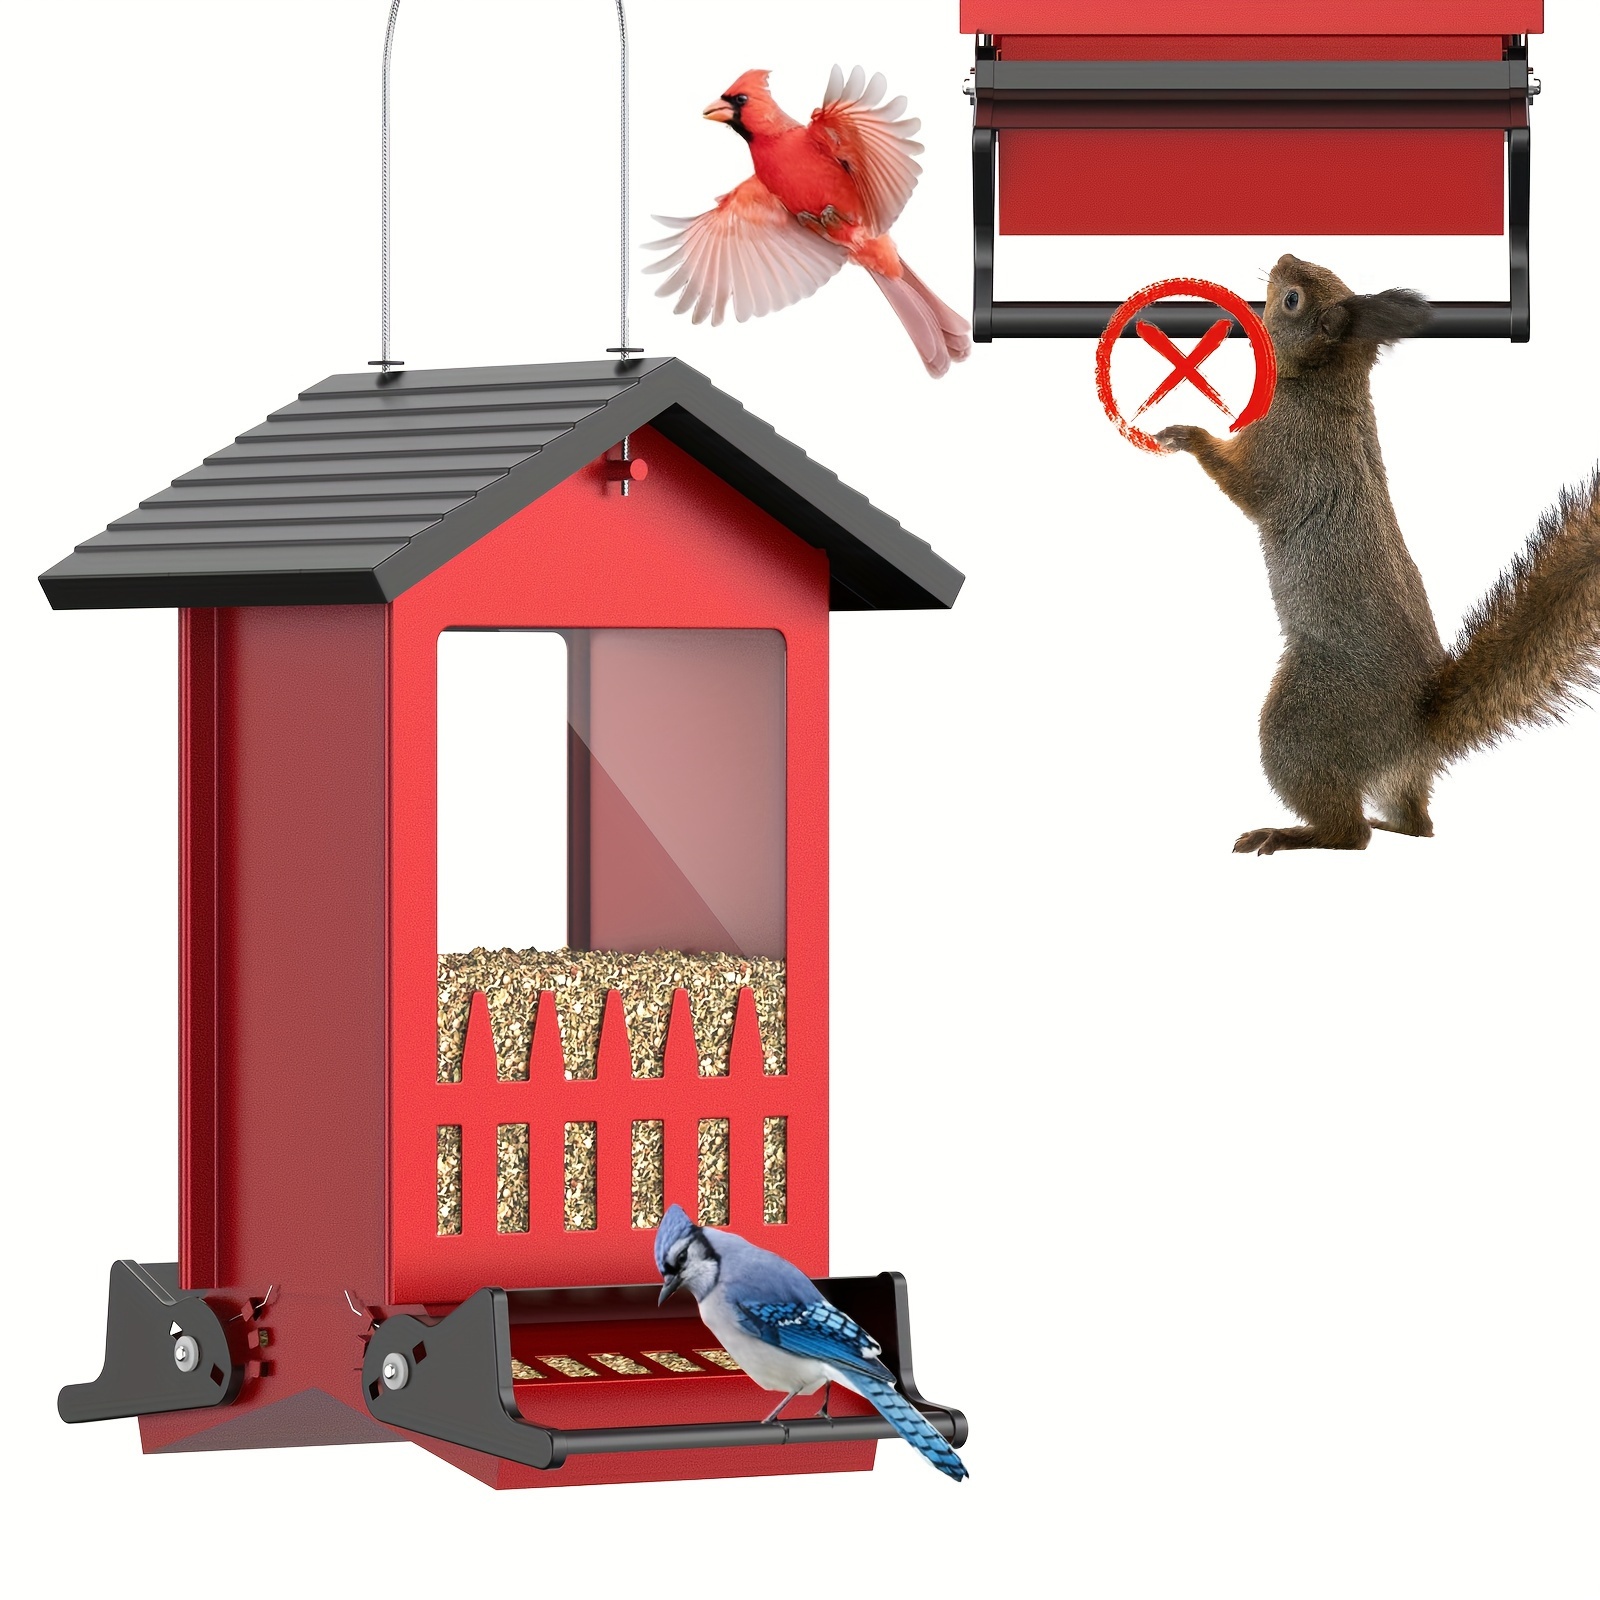 

1pc Squirrel Proof Bird Feeder For Outdoors Hanging, Metal Hanging Bird Feeder With Bilateral Weight-activated Perches, 8lbs Large Capacity Wild Bird Feeder, Squirrel Chewing Proof